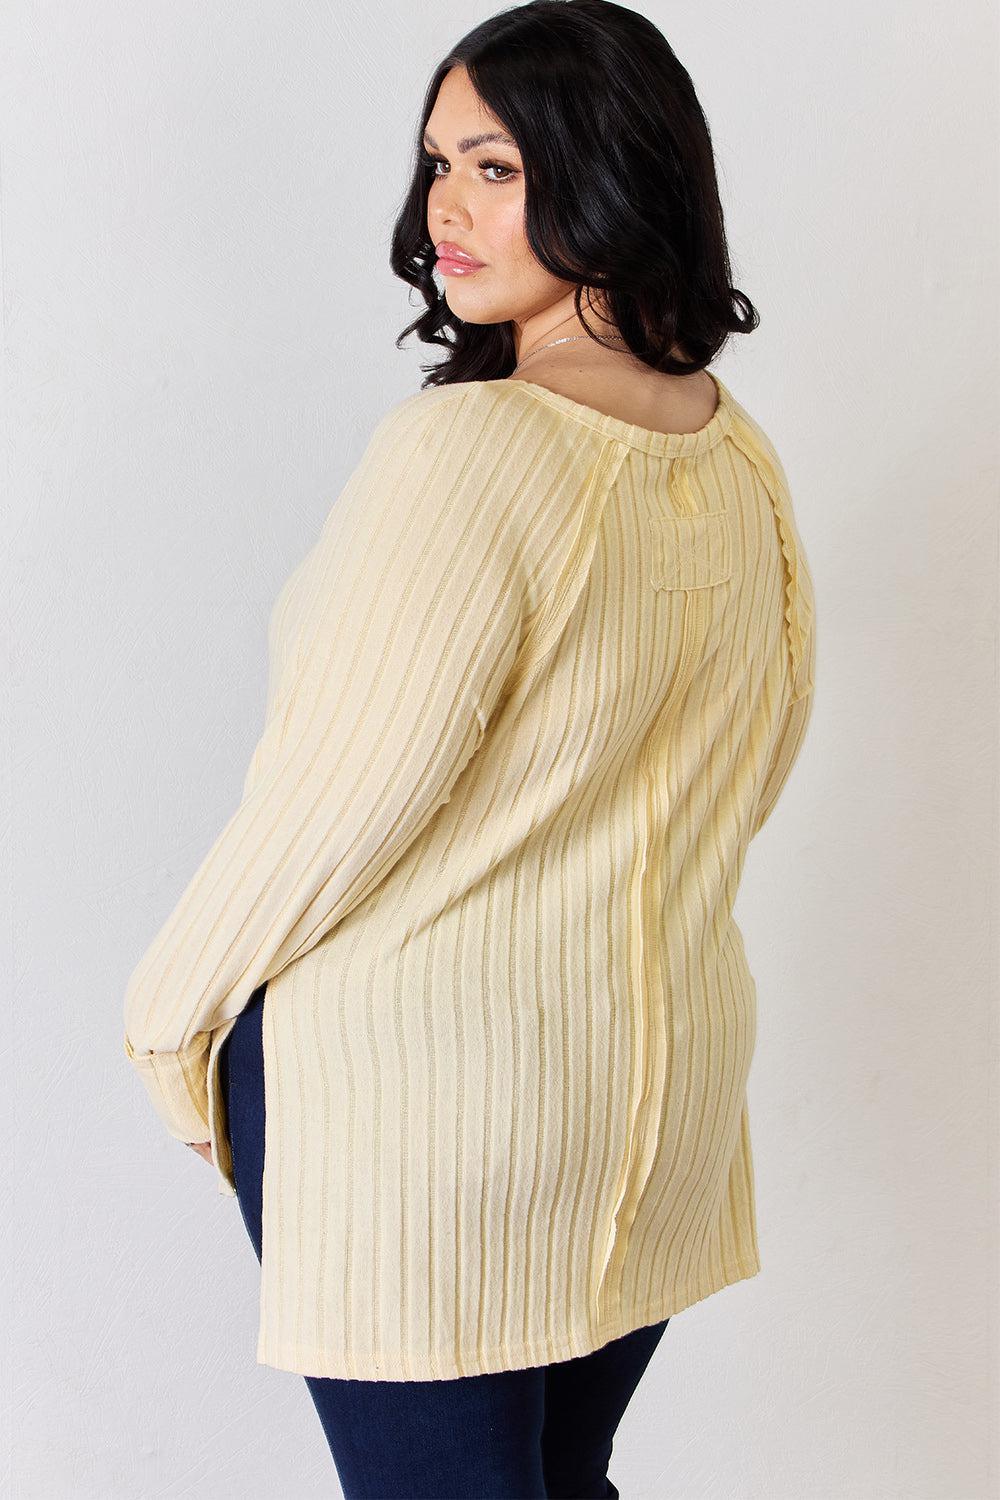 a woman wearing a yellow sweater and jeans